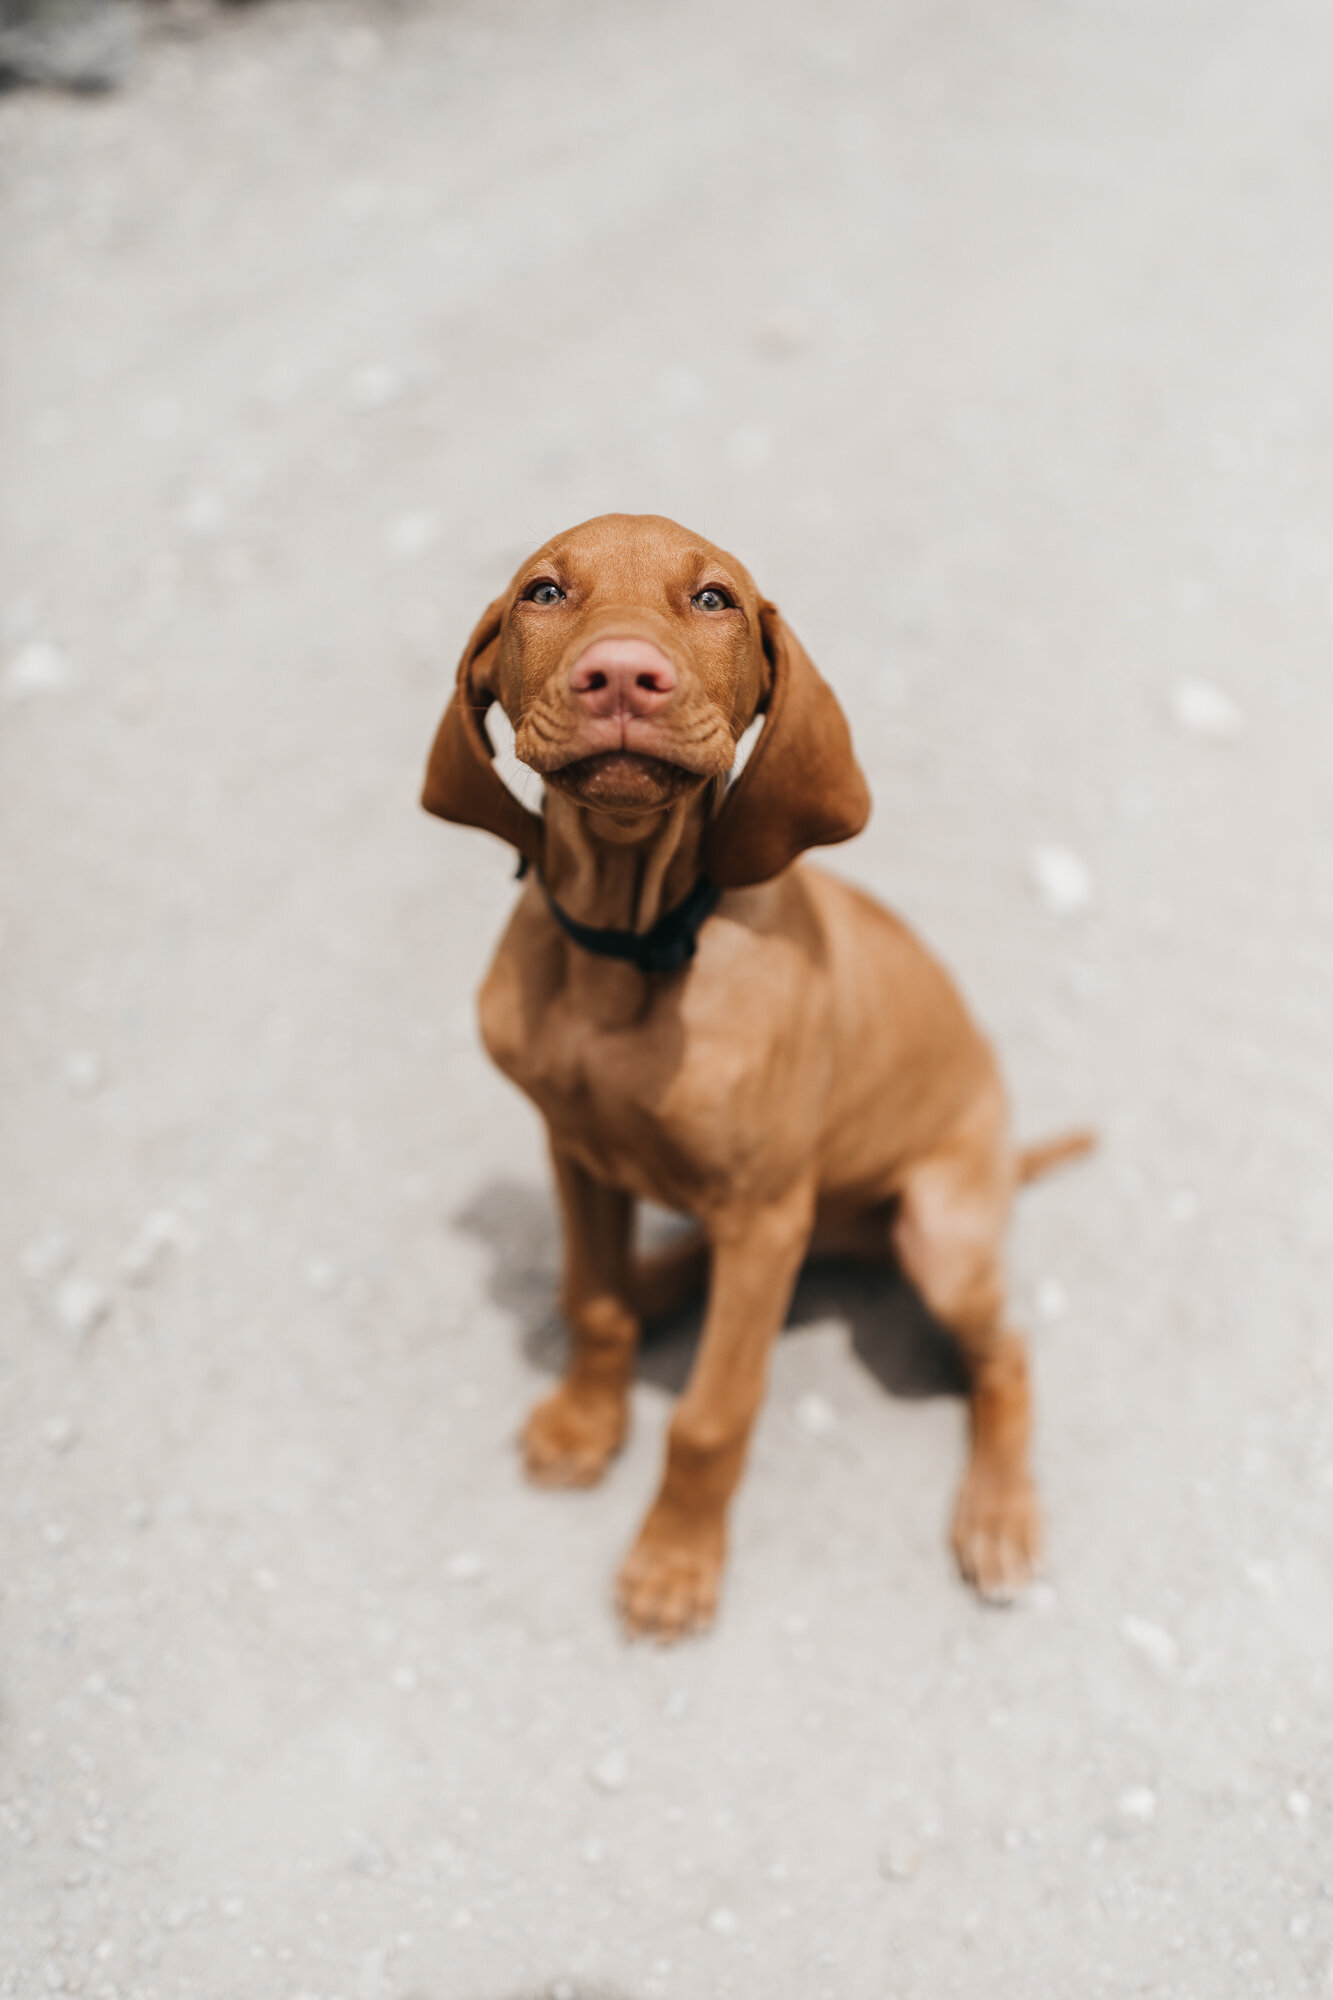 Our goofy pup -  ISO  (a Hungarian Vizsla born 2020) He is the biggest snuggler who will insist on a 5 min hug every morning. He will grow up to be a biking and hiking fool keeping us company on the trails as we keep on exploring.